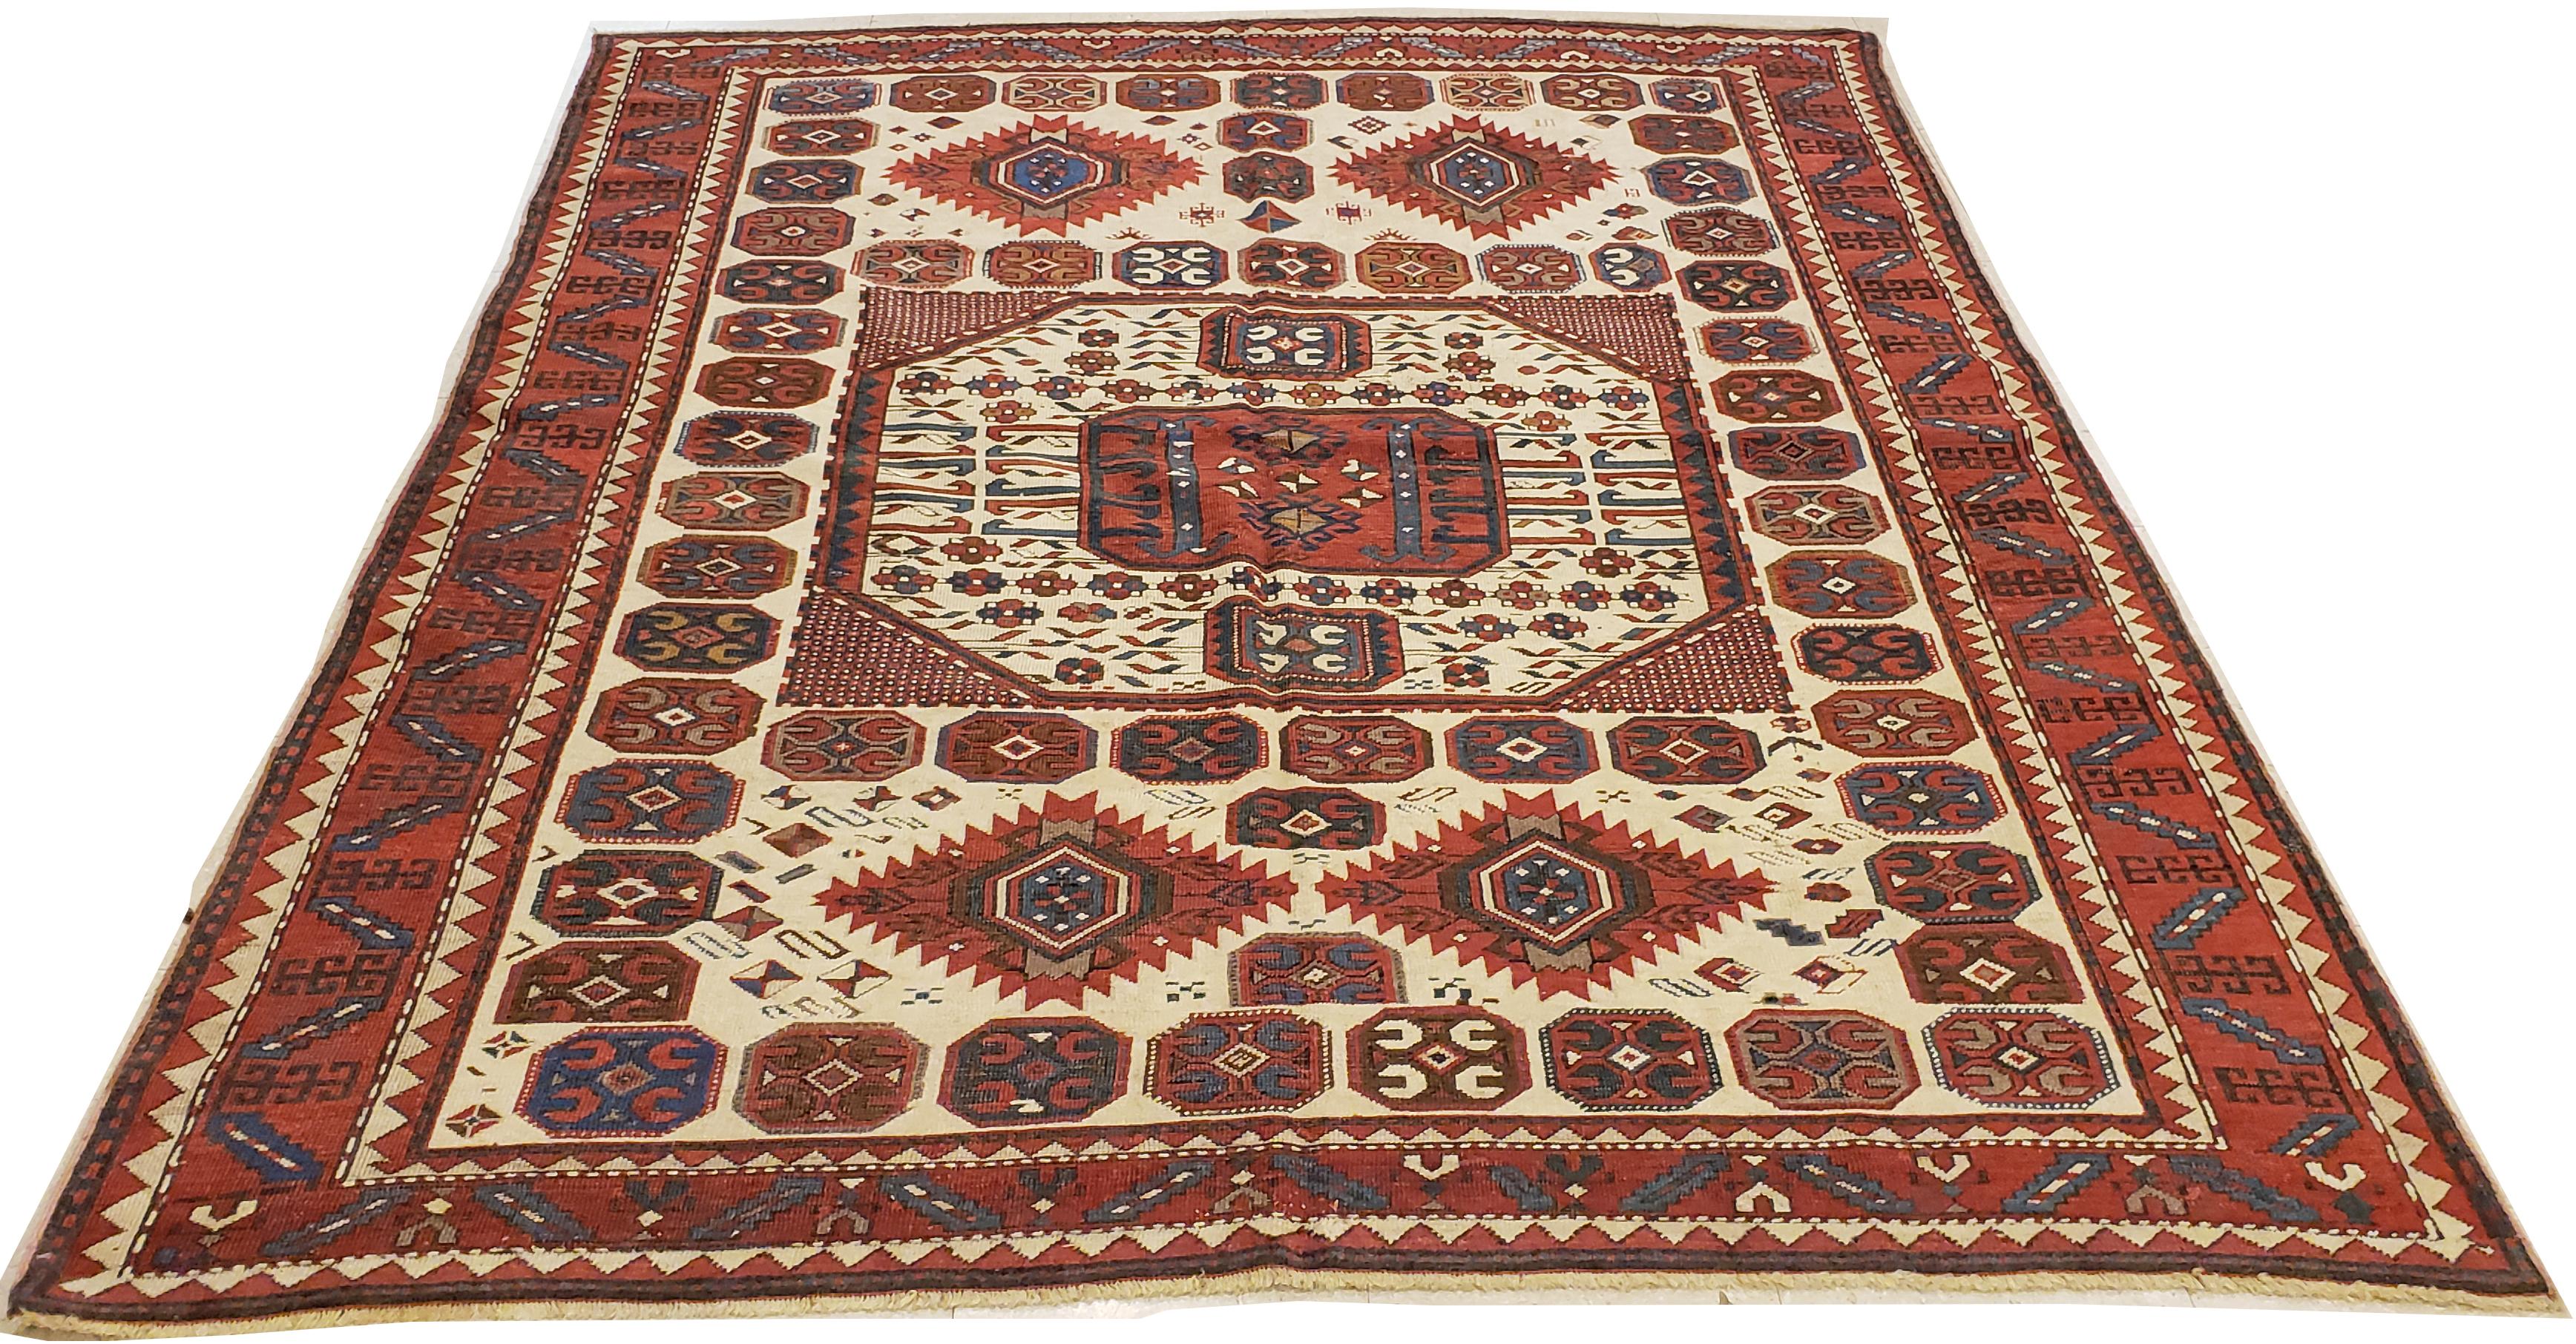 Karachov Kazak: A quite famous and seldom-found design type, usually attributed to the Armenian weavers of the high Caucasus Mountains. The best of the Karachov rugs (also spelled Karachoph) are stunning beautiful 19th century antique Oriental rugs,